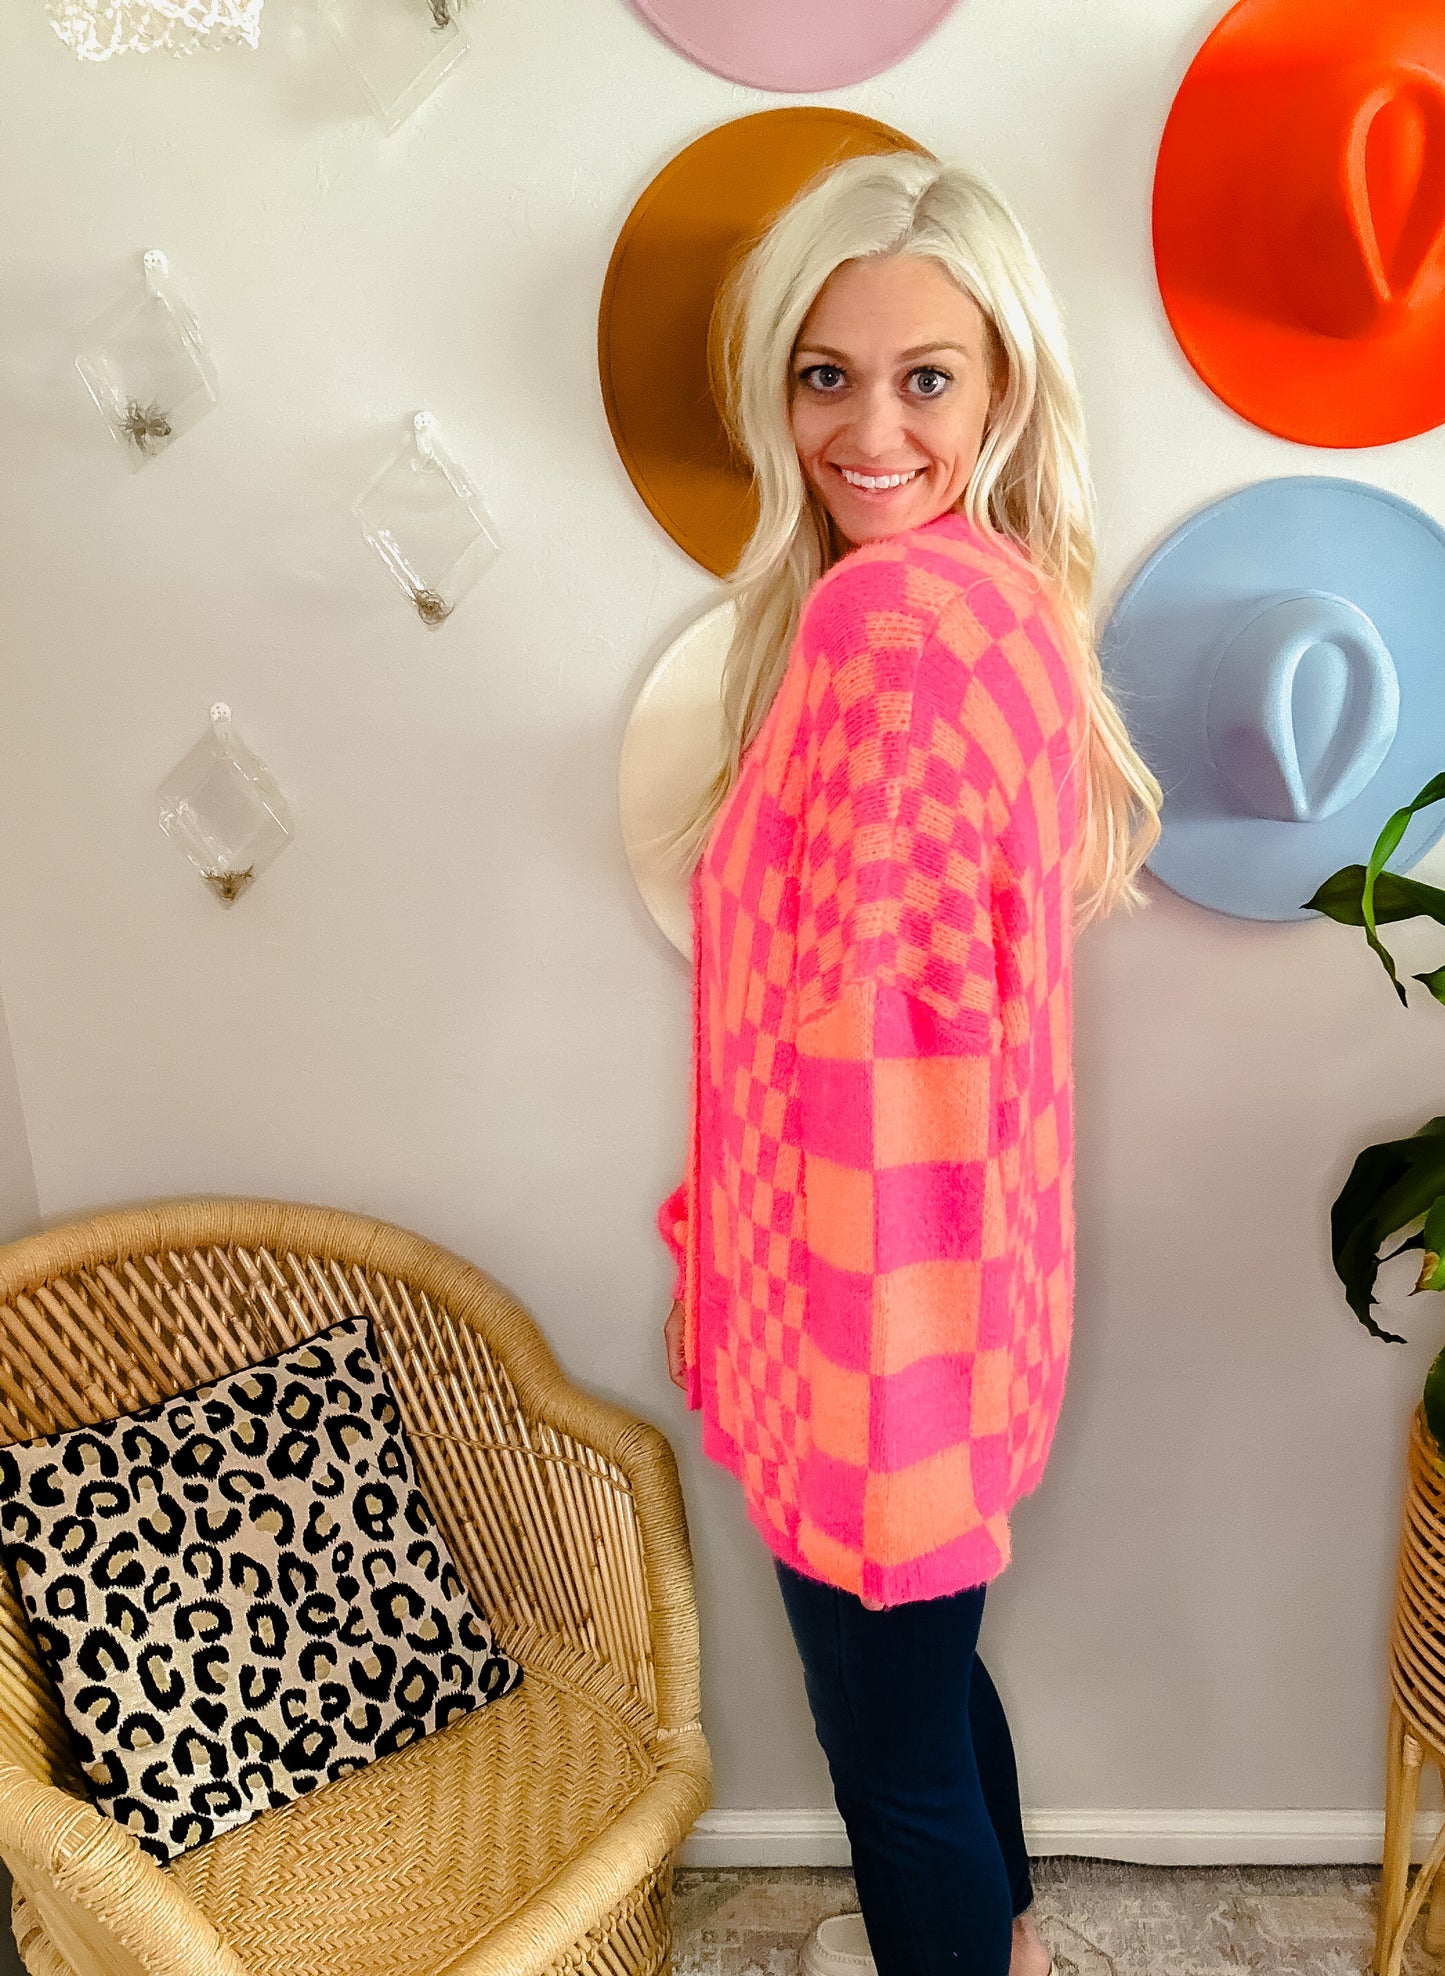 Neon Pink and Orange Checked Cardigan